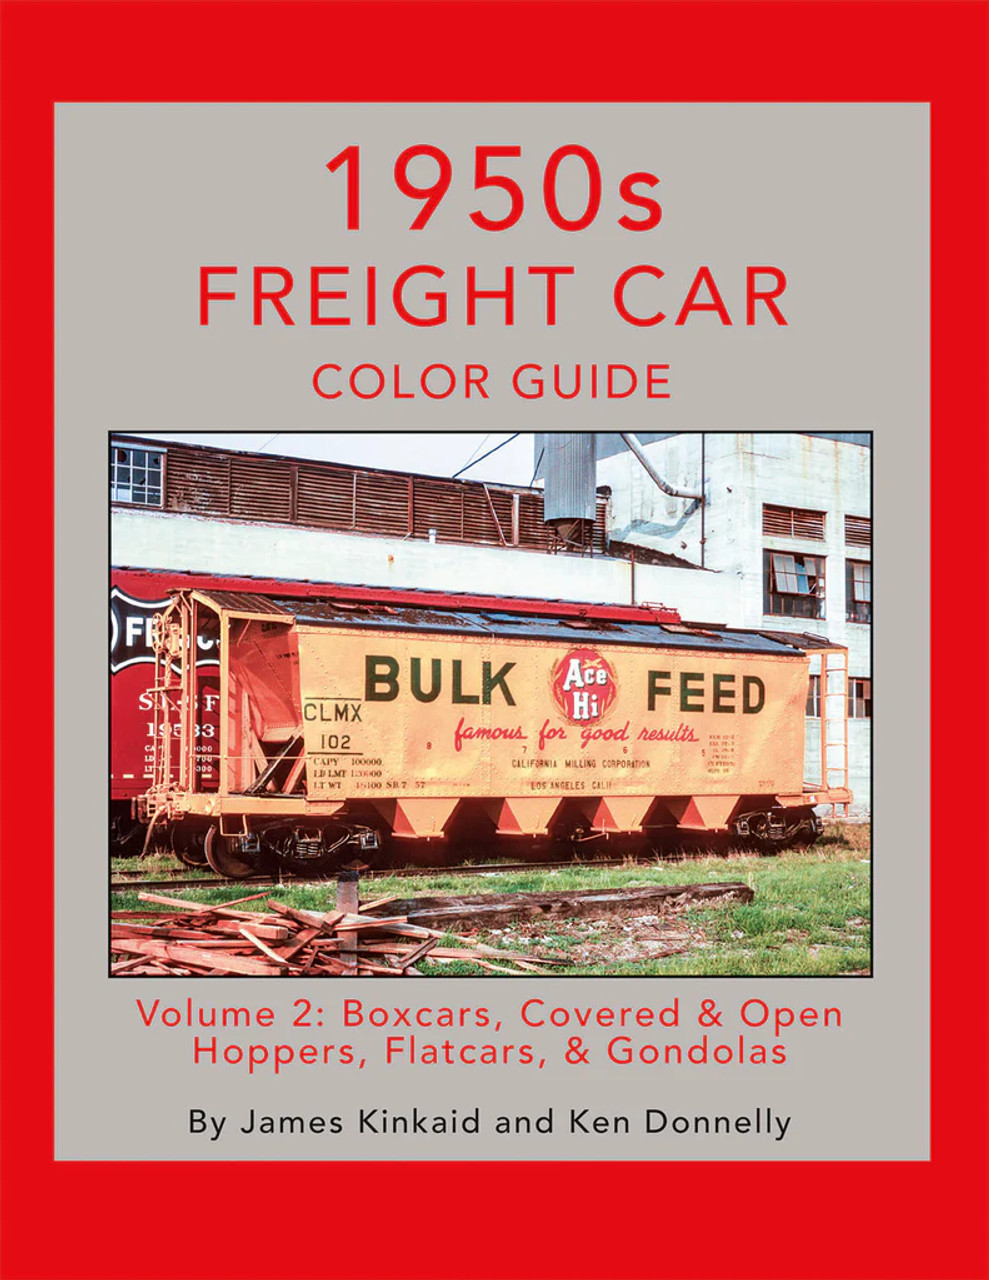 Morning Sun 1771 1950s Freight Car Color Guide Volume 2: Boxcars, Covered & Open Hoppers, Flatcars, & Gondolas